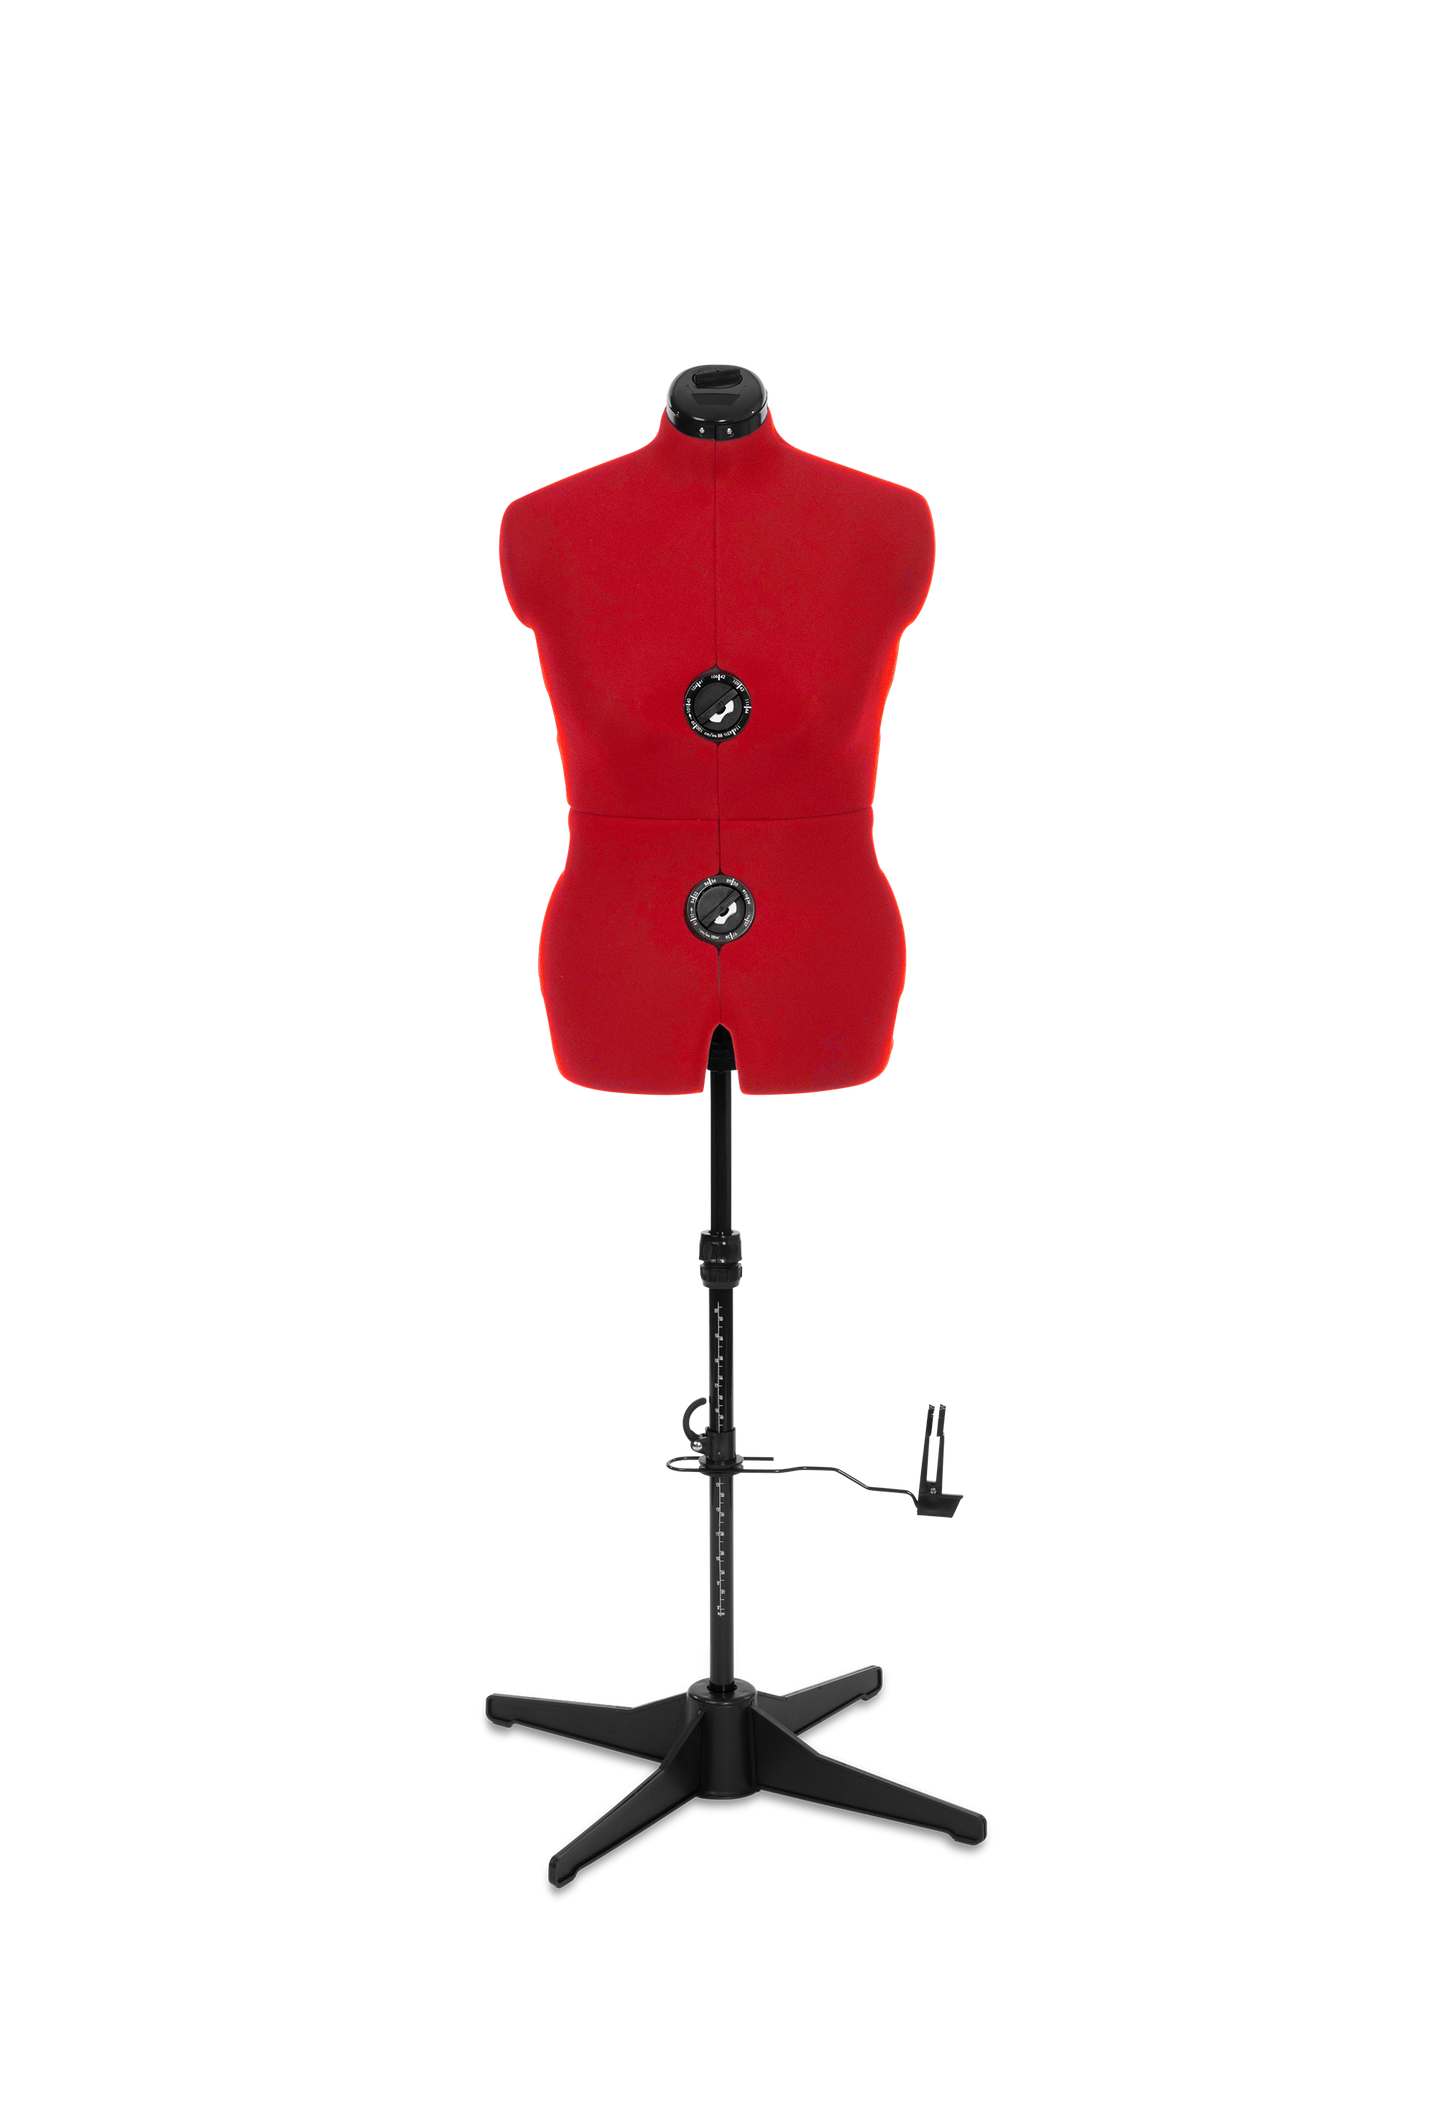 Adjustoform Elizabeth Tailormaid Dress Form - Heavy Duty 8 part body with 11 adjusters - As new, Customer returned due to exchanging size